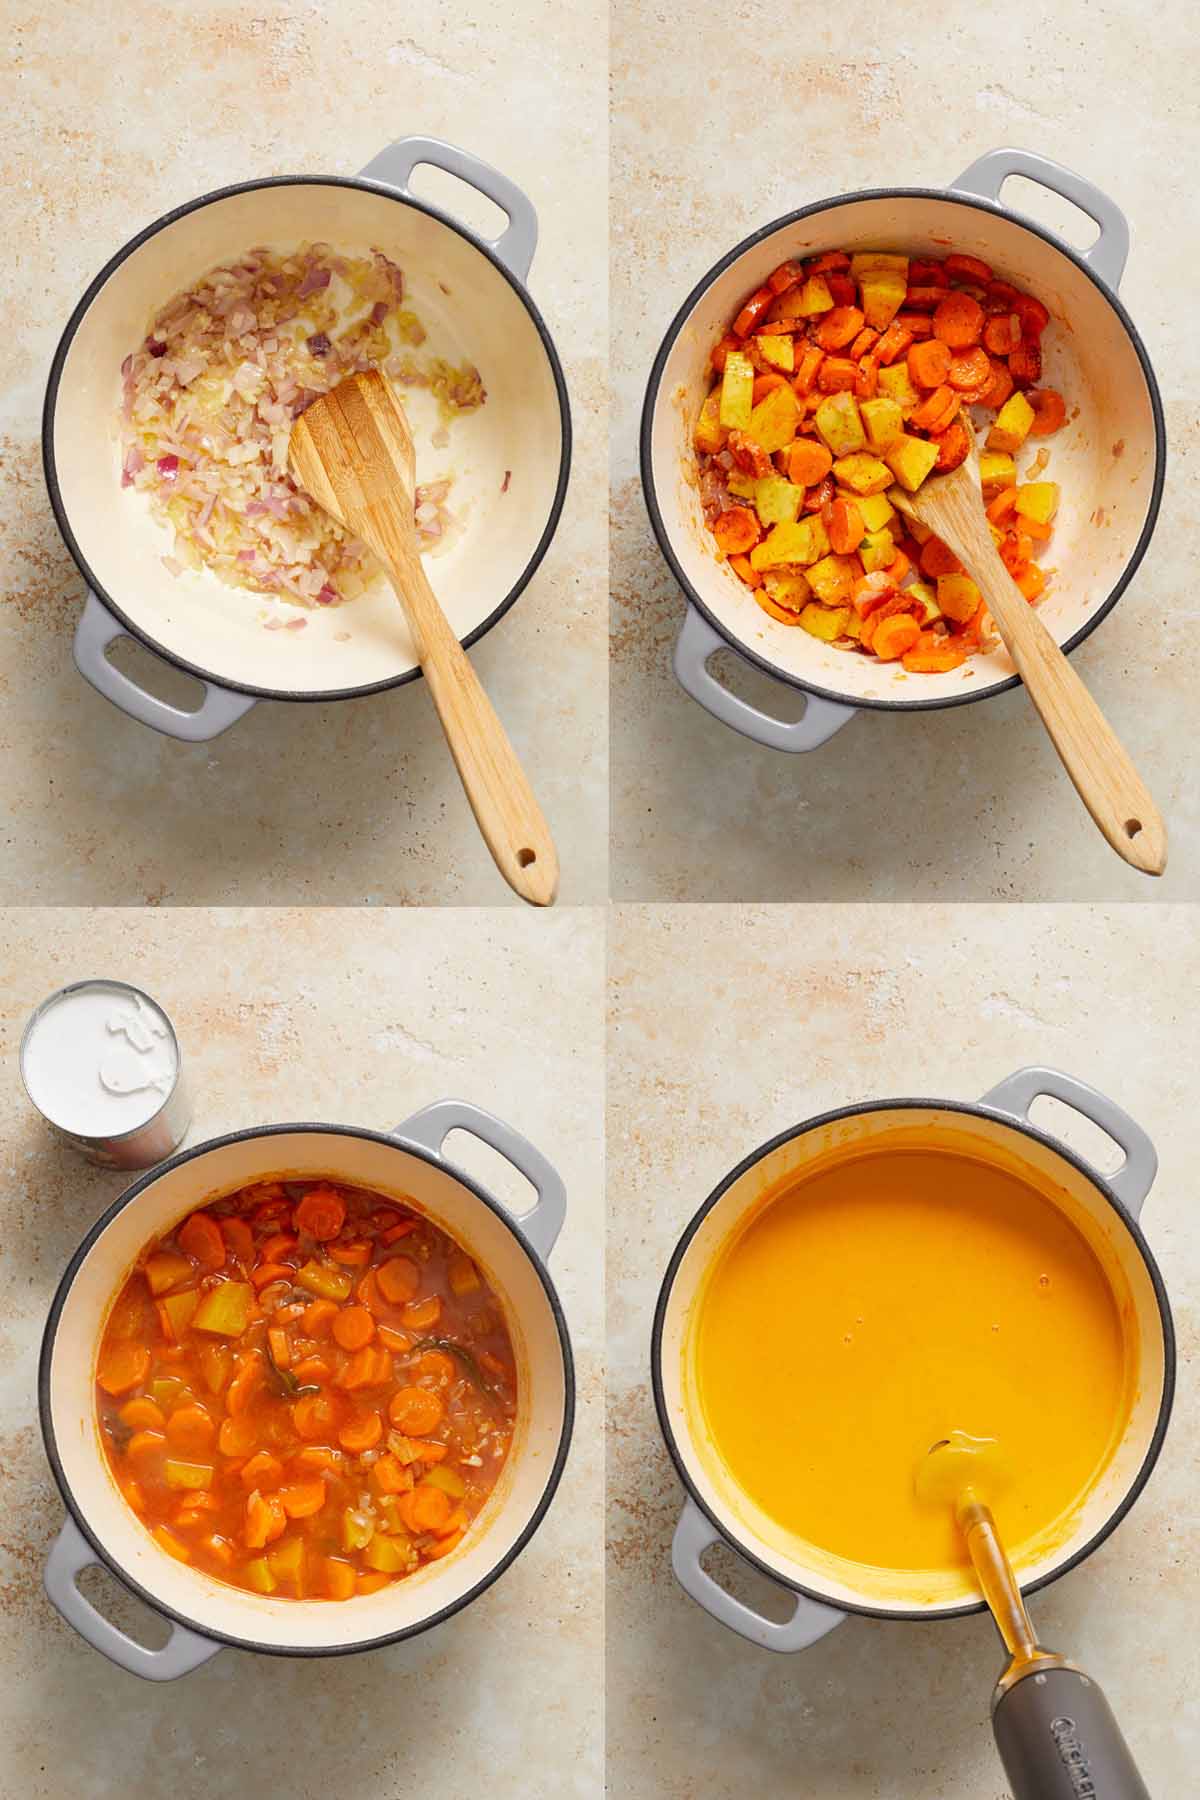 Collage of 4 images showing how the soup is made in one pot.